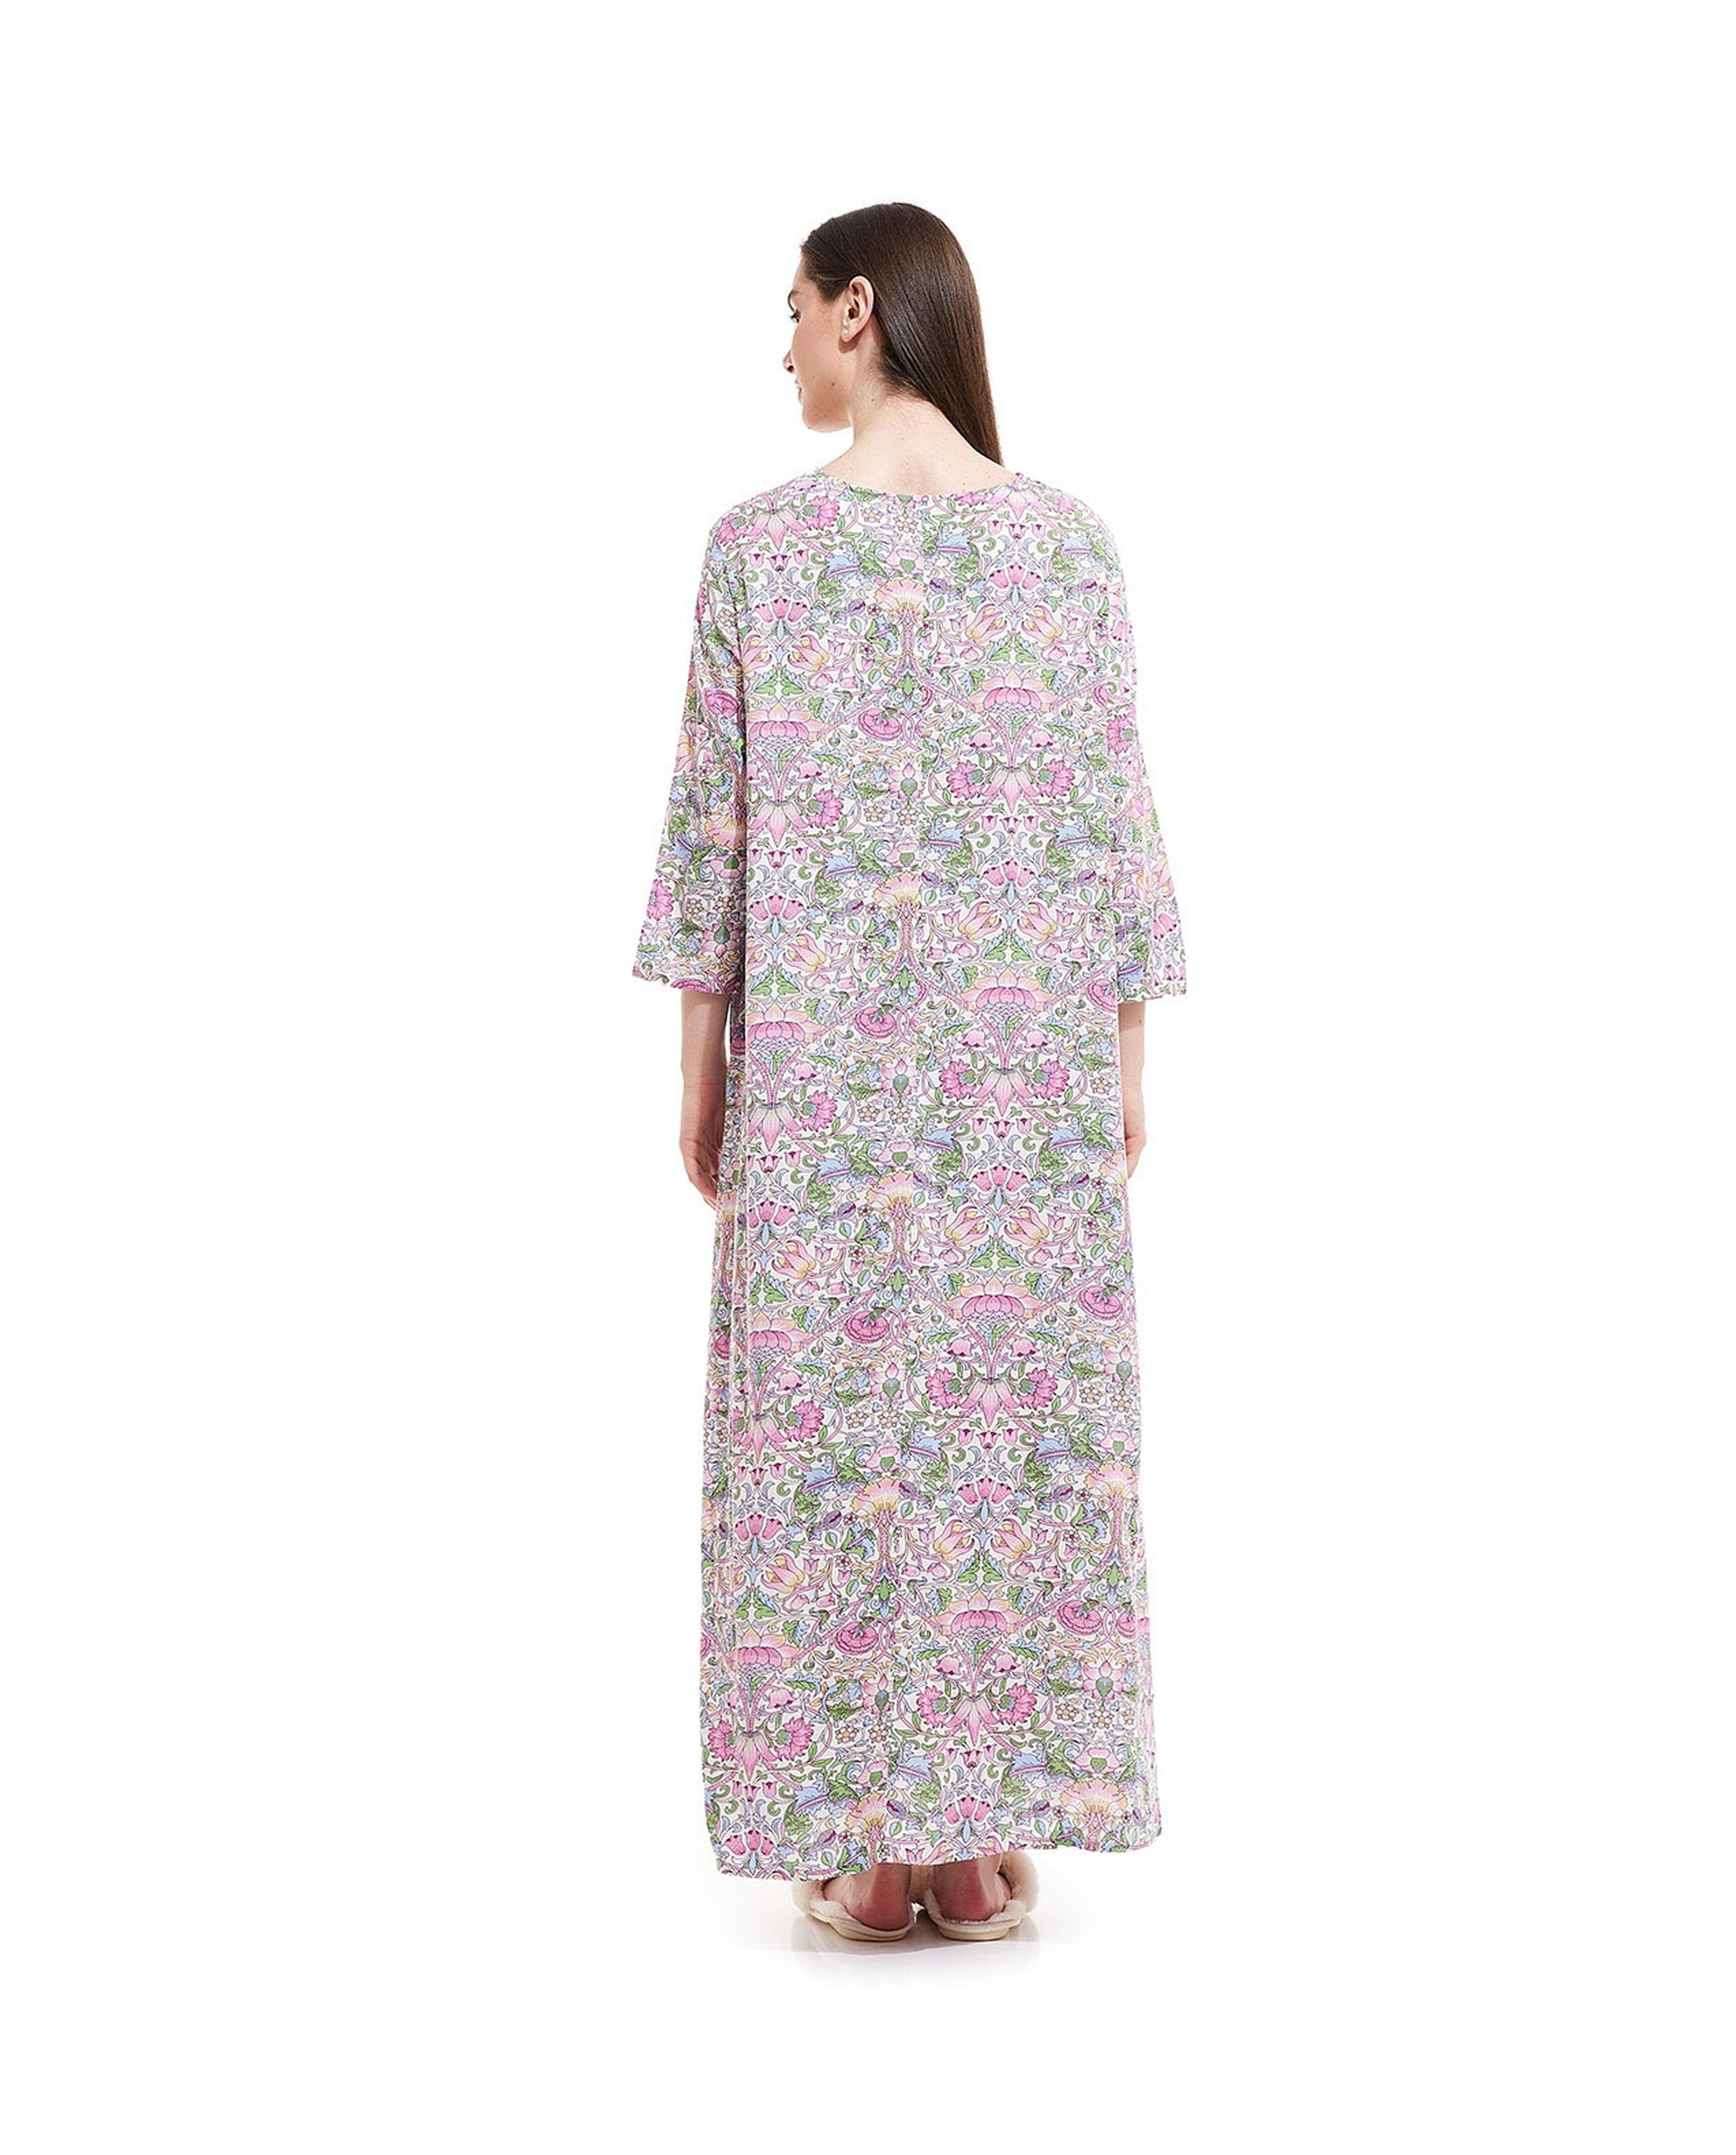 Printed Nightgown with Lace Up Neck and Long Sleeves